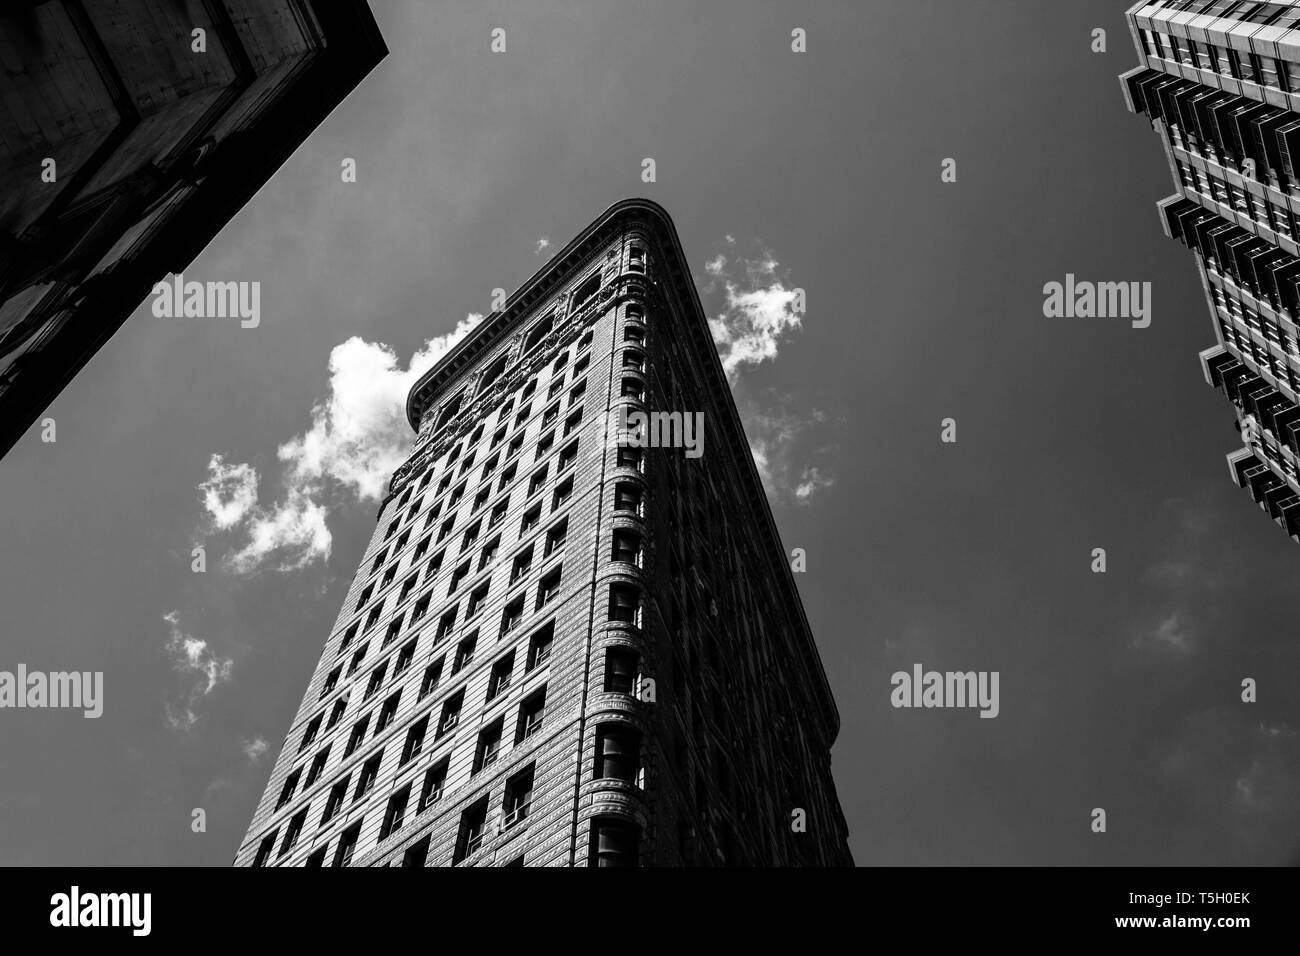 Low angle black and white shot of the Flatiron building in NYC Stock Photo